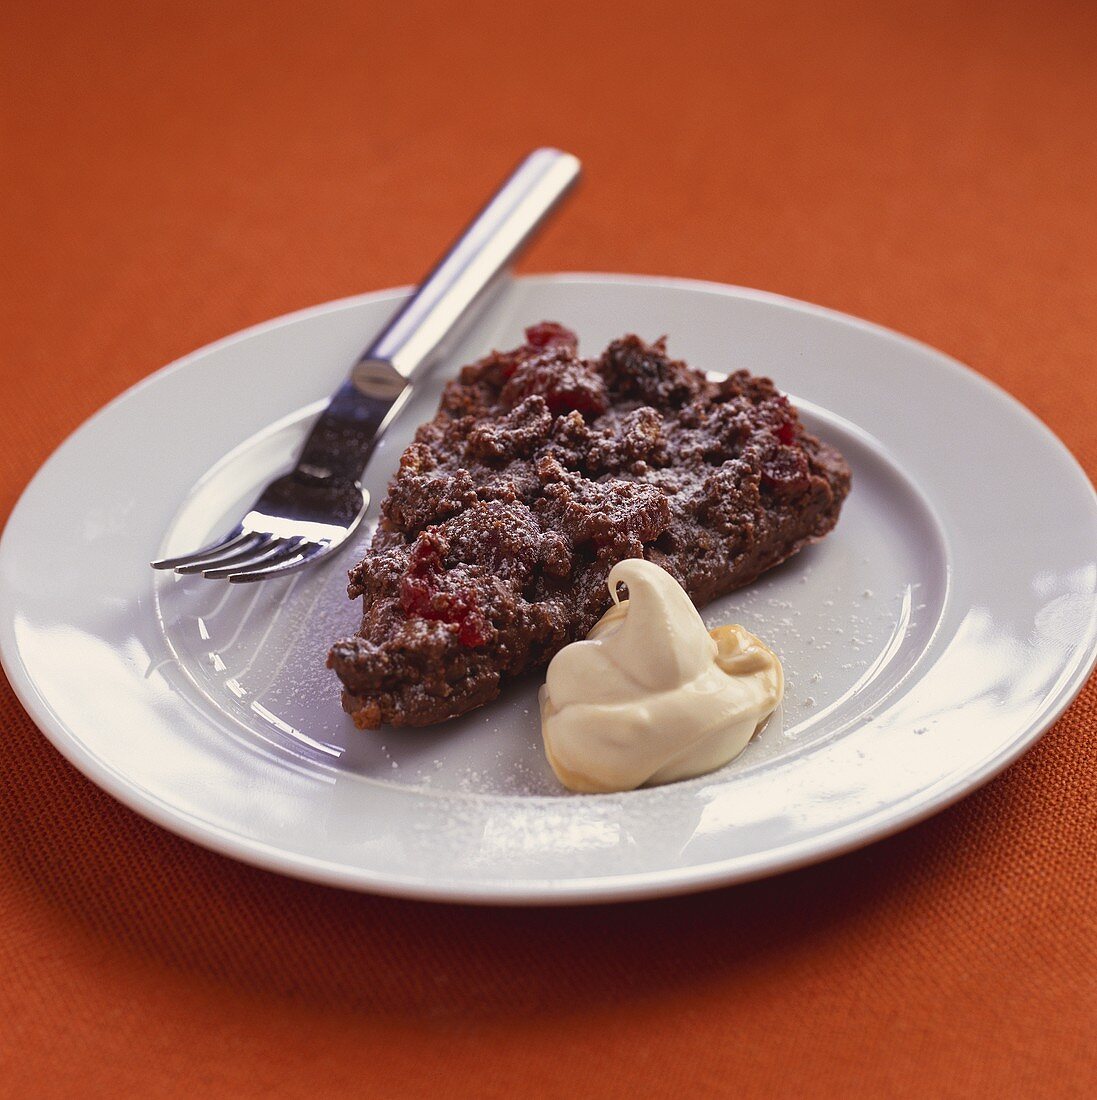 A piece of chocolate cherry cake with blob of cream on plate